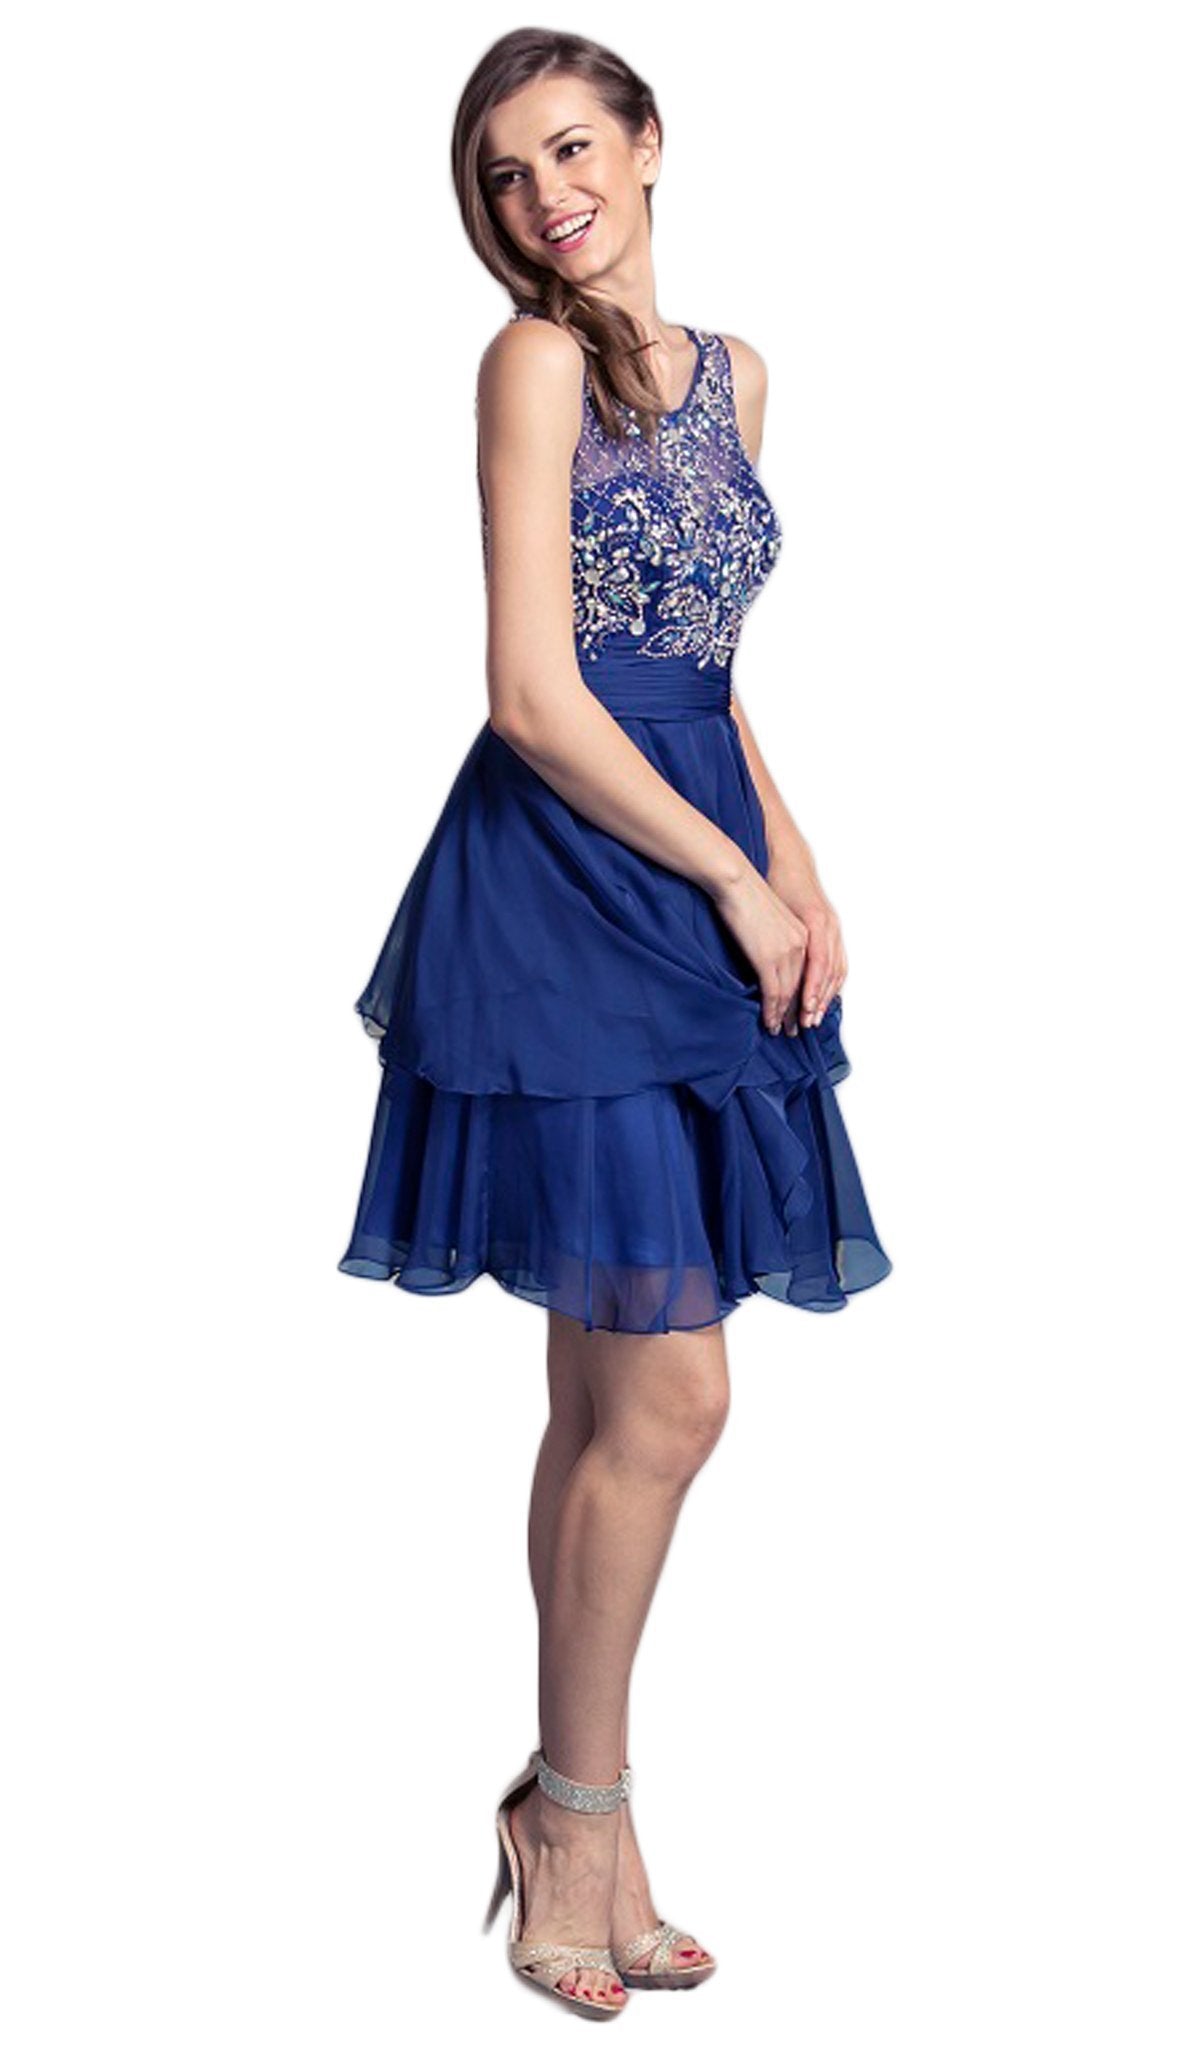 Dazzling Tiered A-line Homecoming Dress Dress